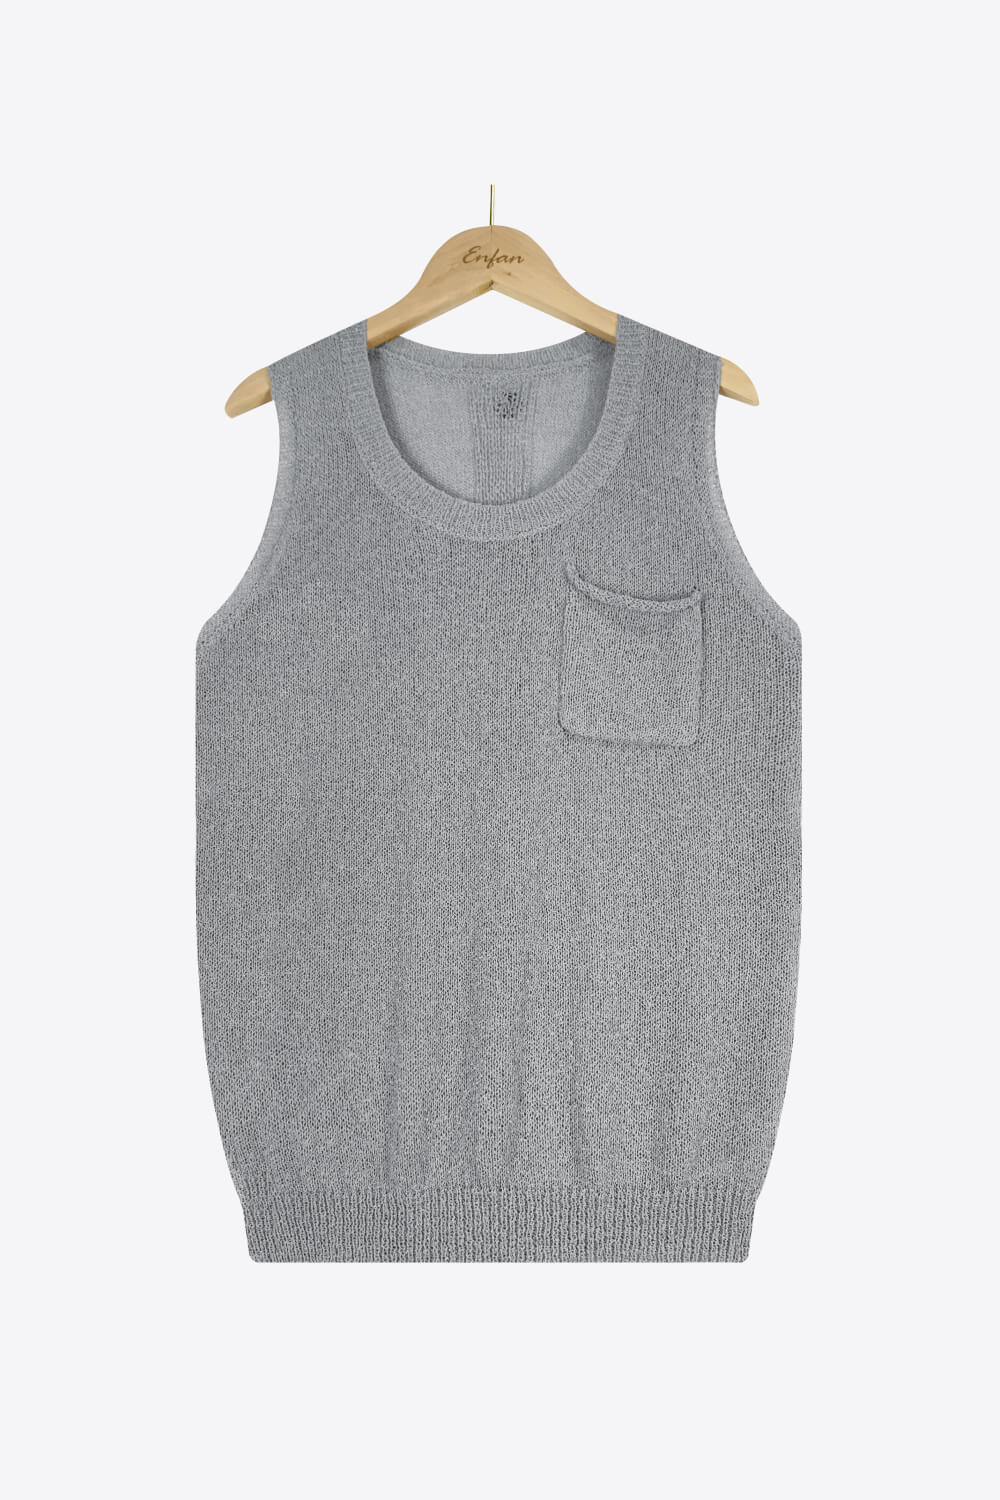 Buttoned Pocket Tank